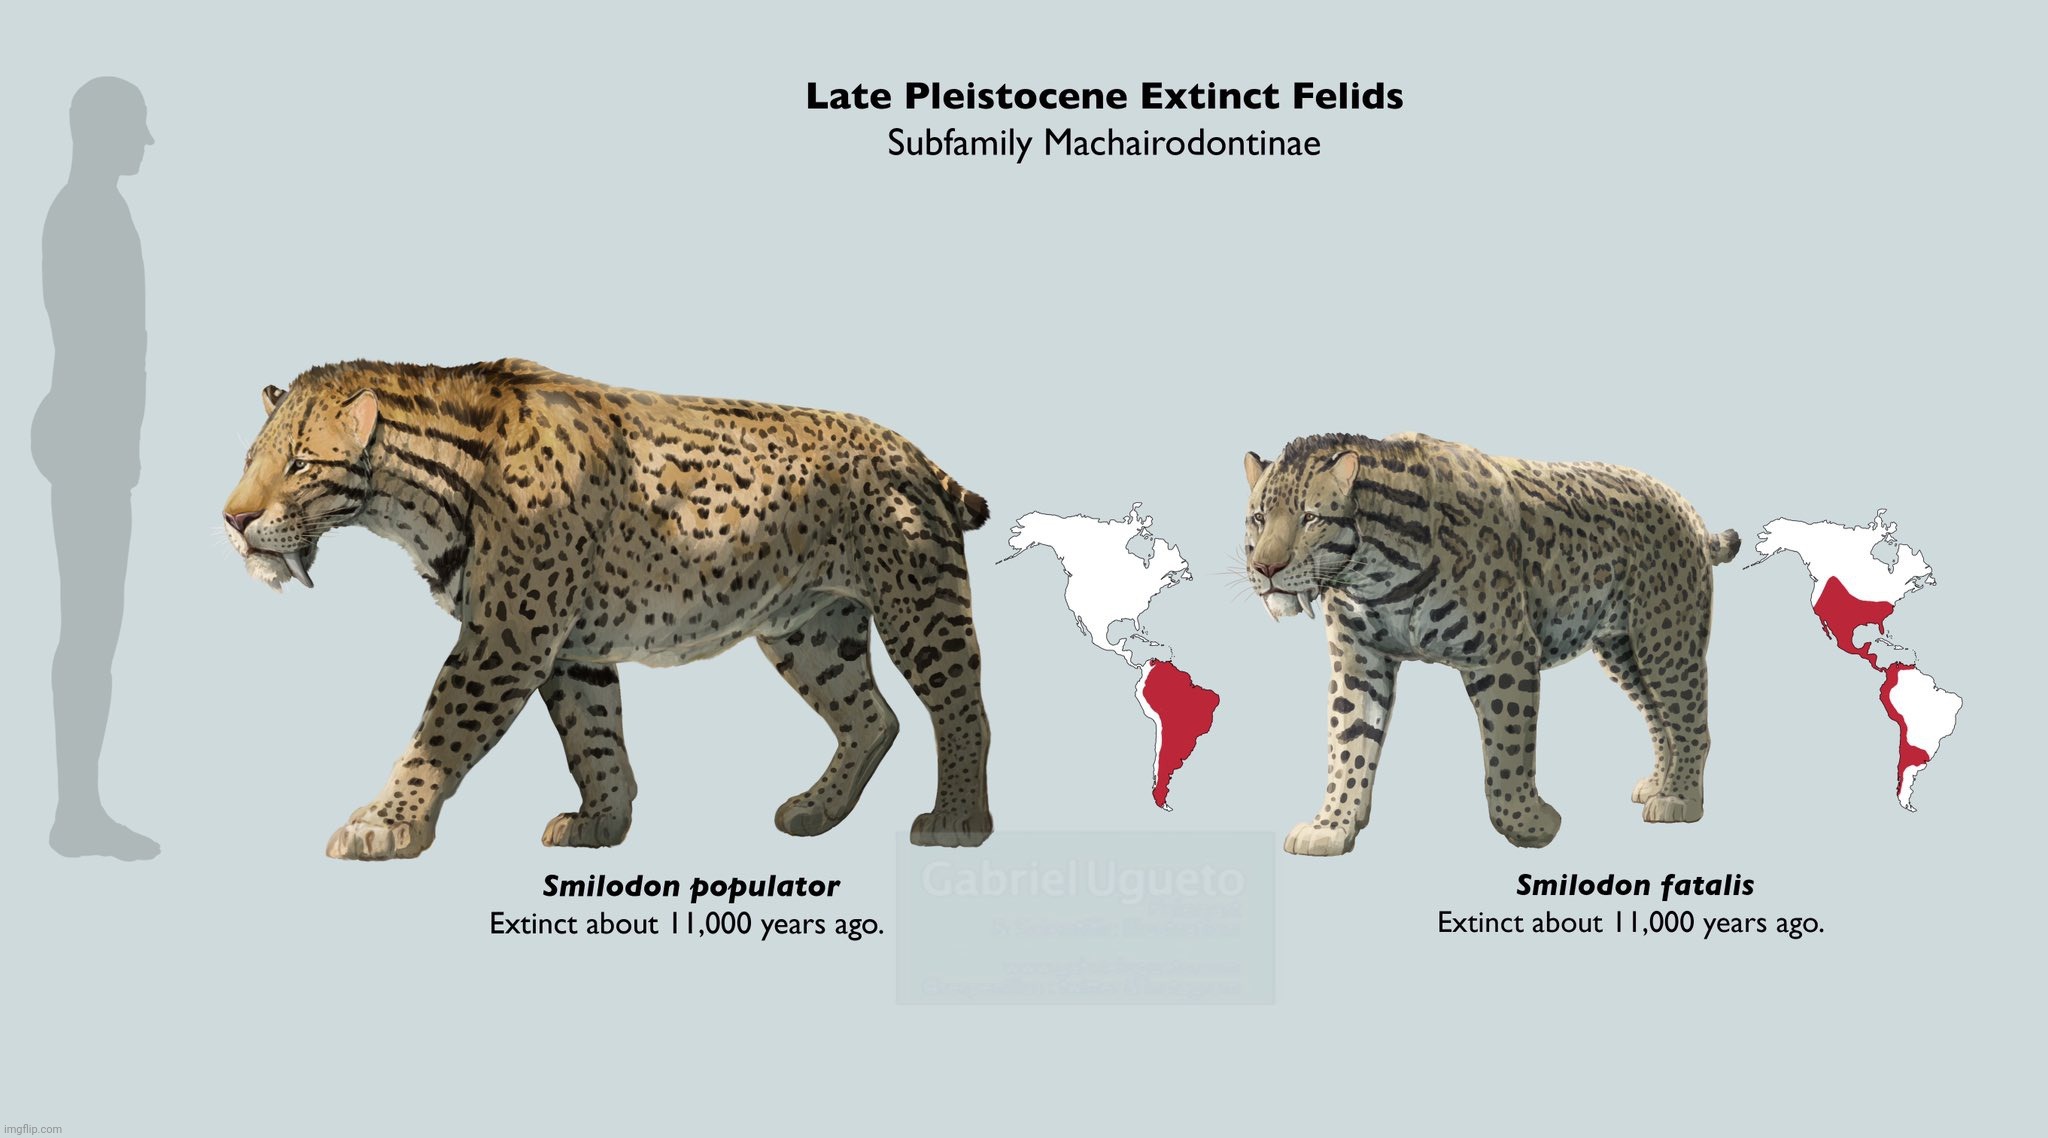 The canines wouldn't have been exposed when the mounth was closed, but at least the build is right. And populator was scary huge | image tagged in smilodon,smilodon populator,smilodon fatalis,pleistocene,wiped out by humans | made w/ Imgflip meme maker